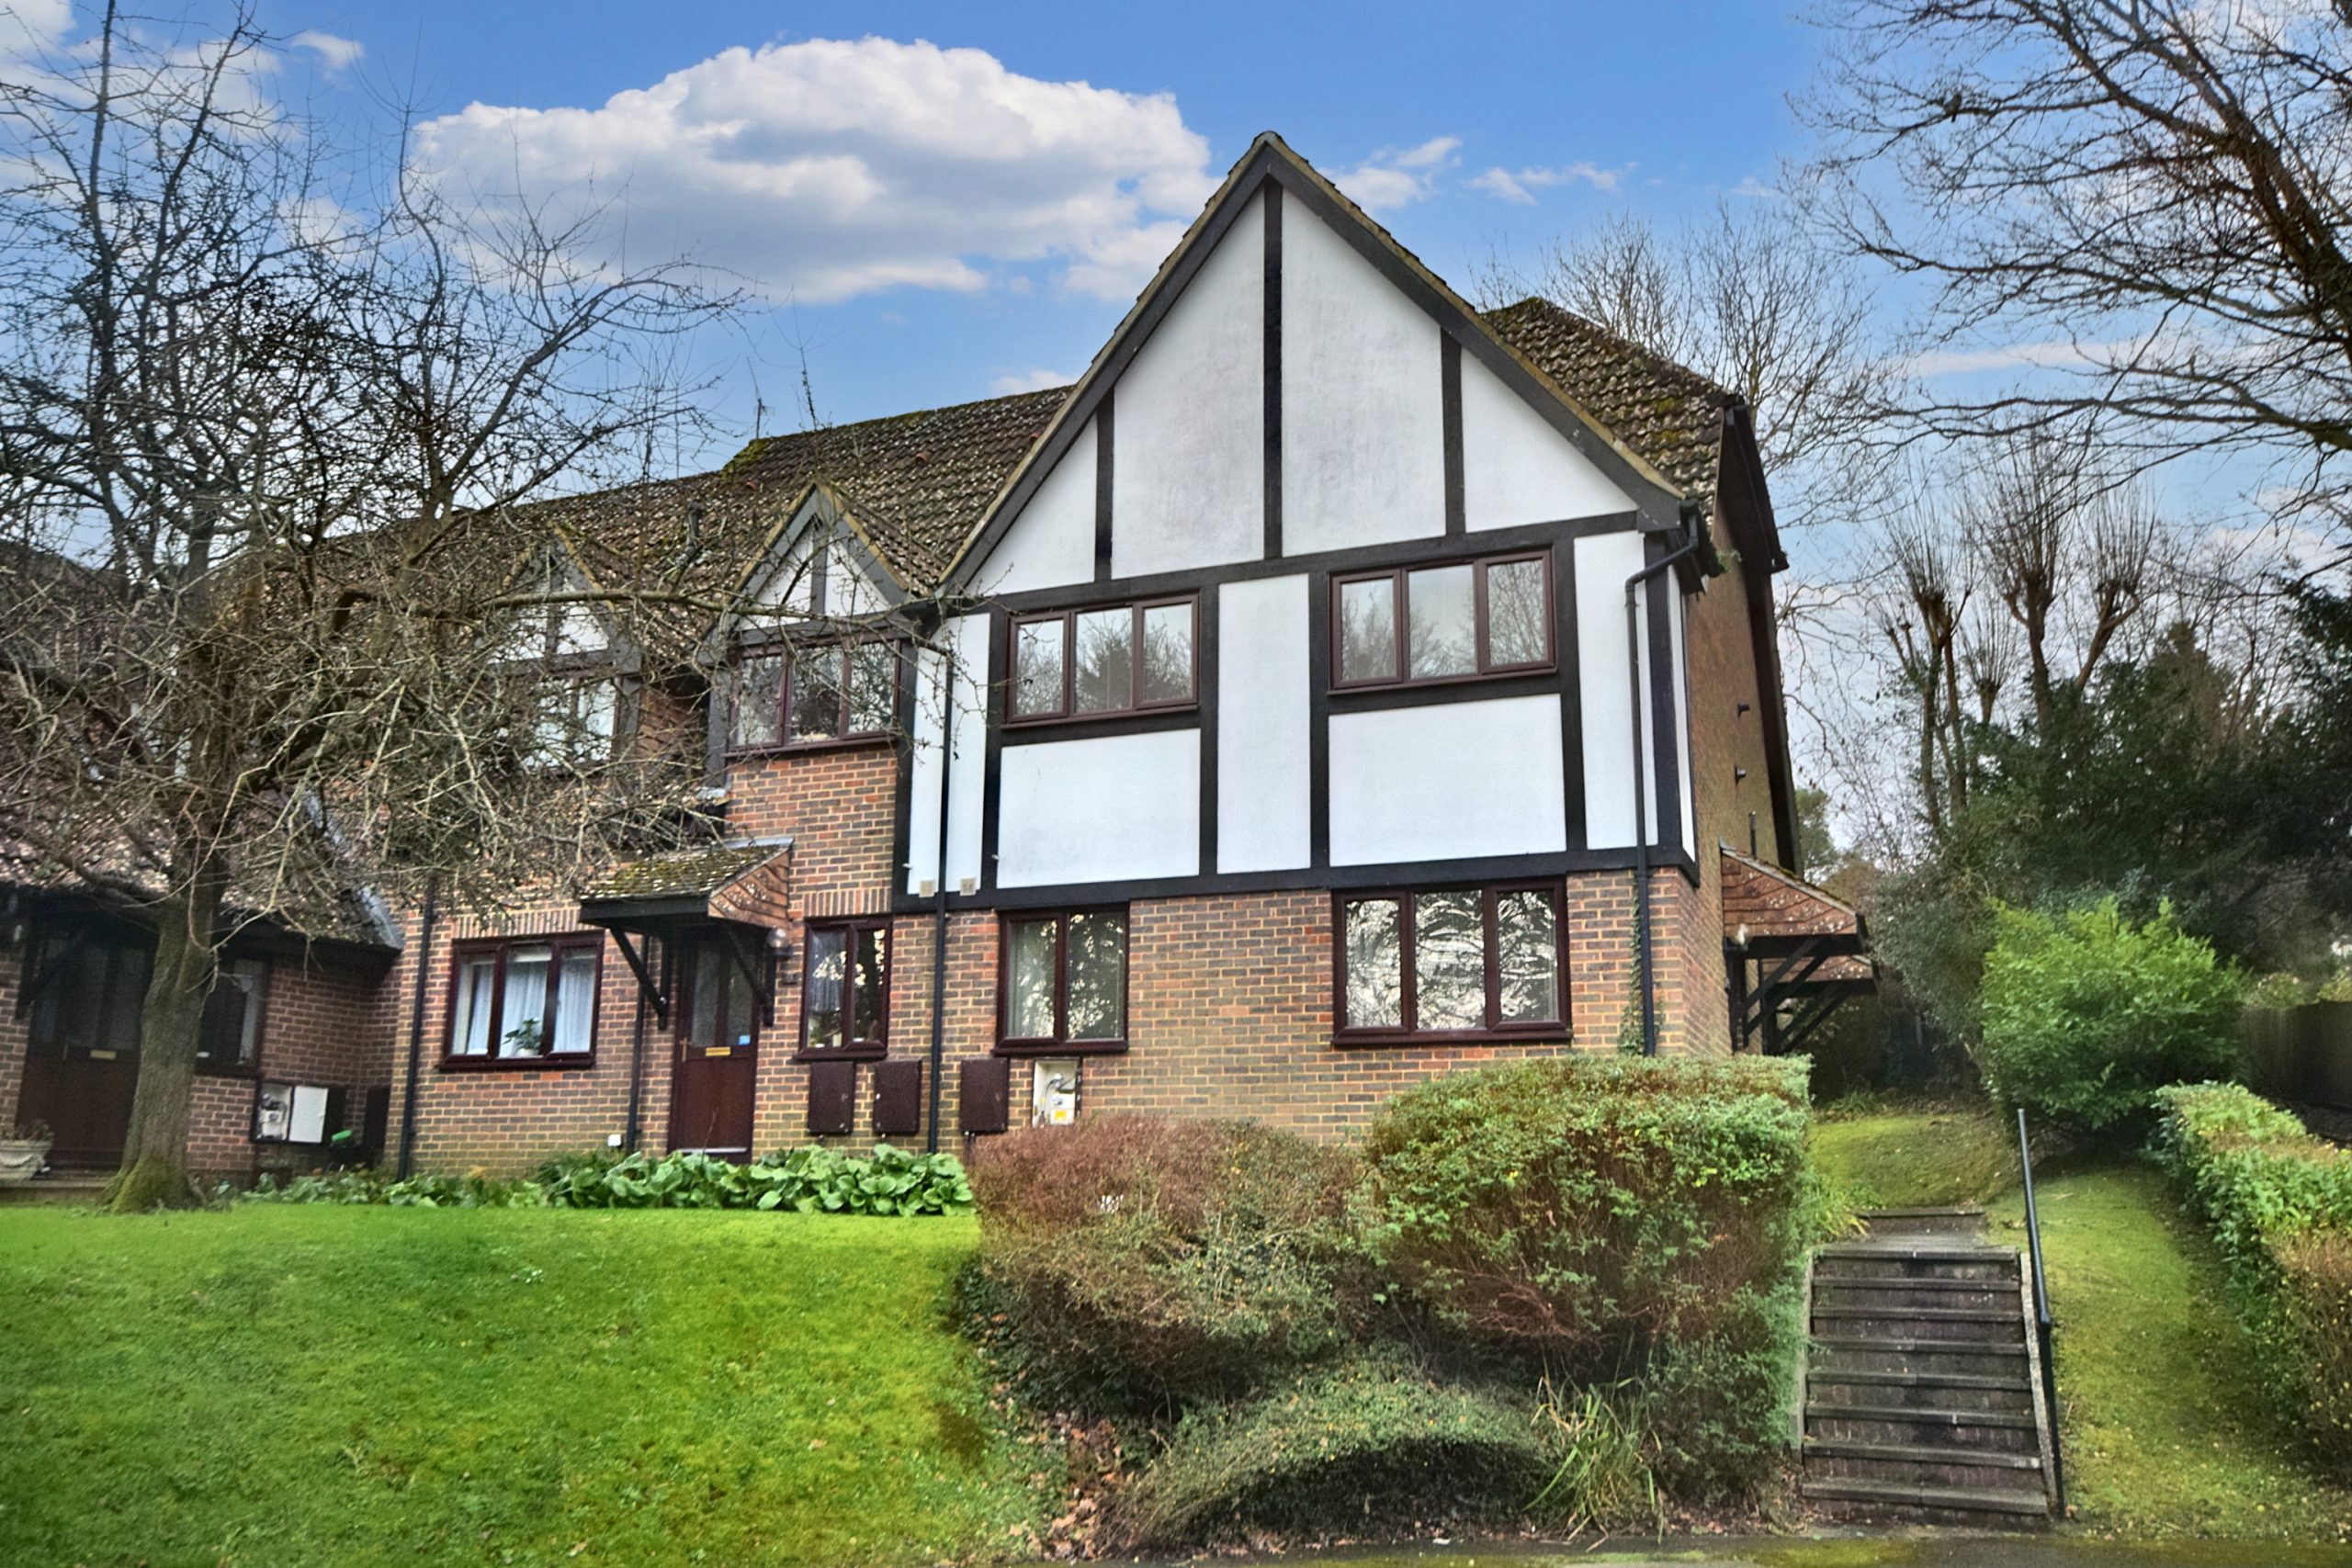 Sale Agreed Over Guide Price Today – £500,000